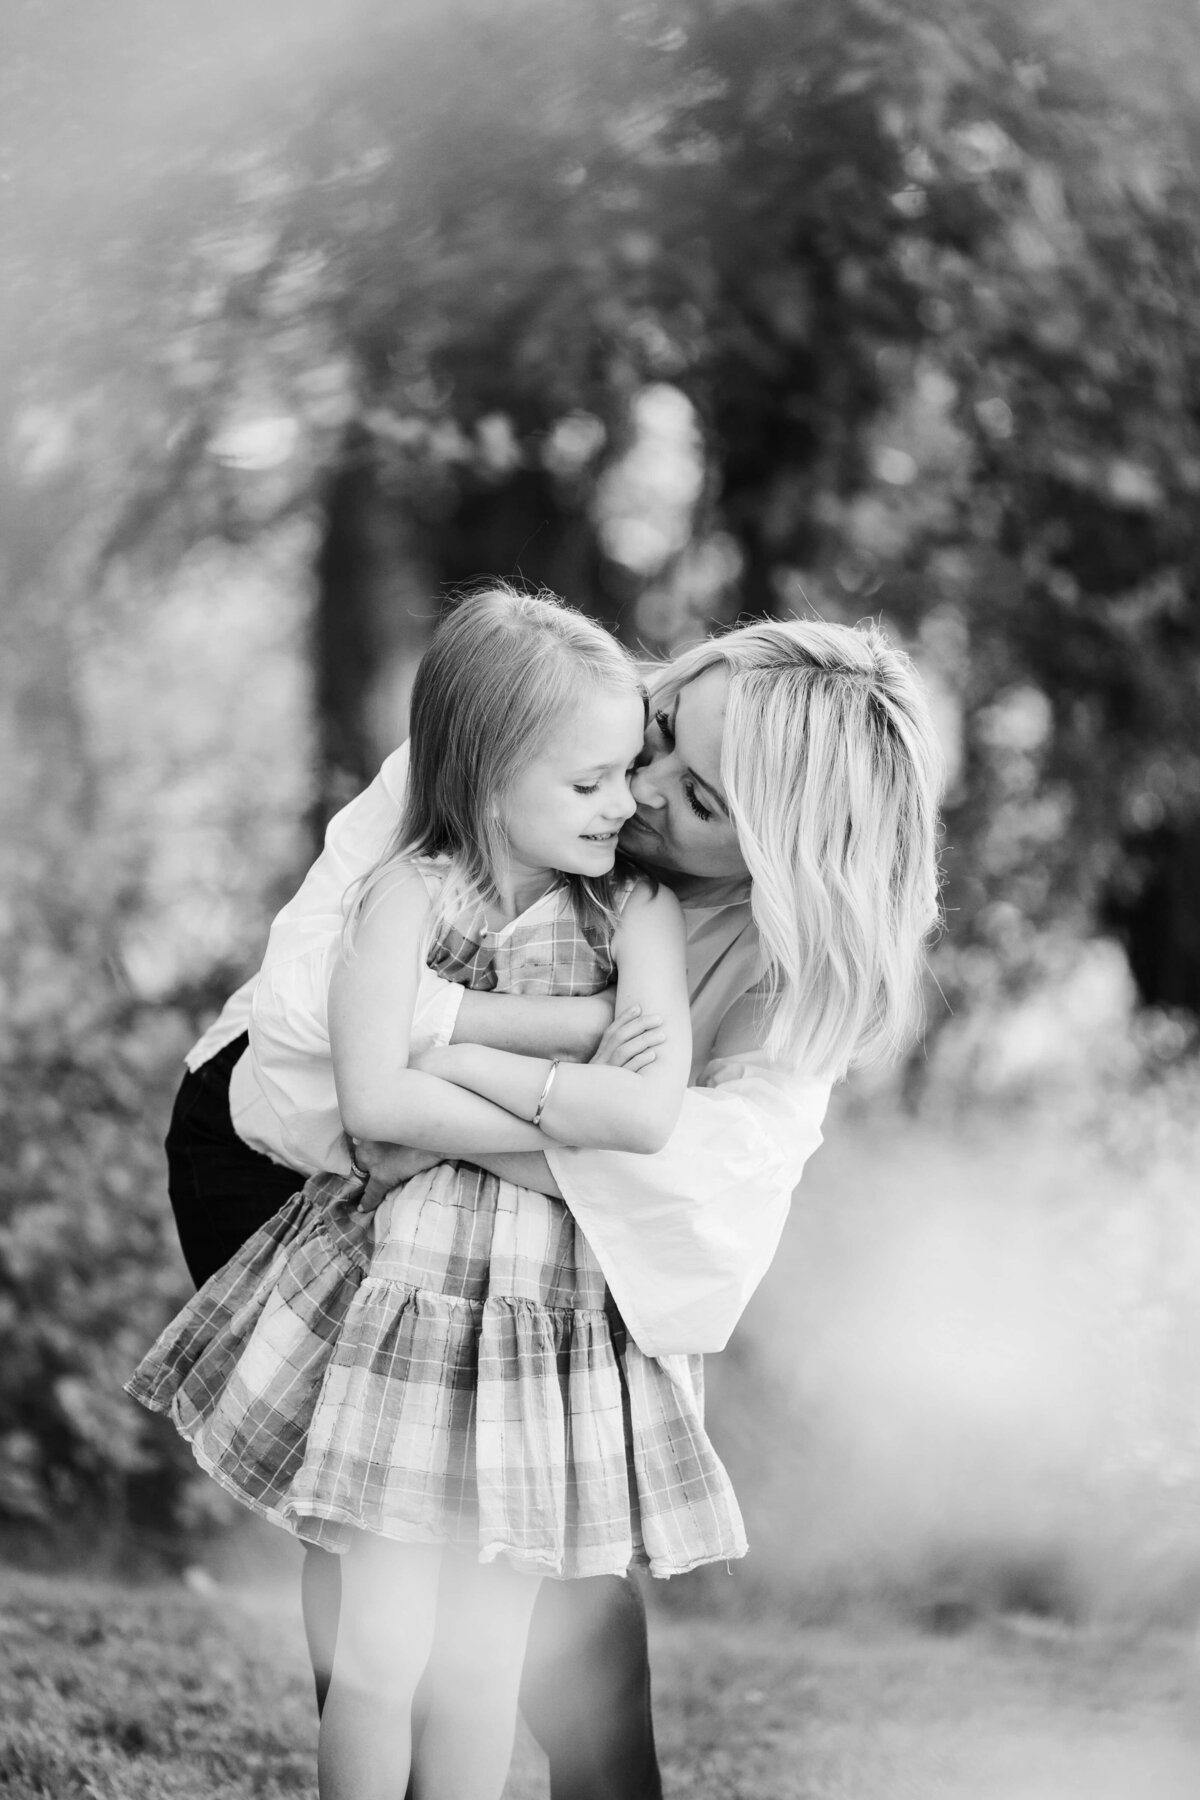 A Pittsburgh family photographer captures a tender moment of a mother affectionately kissing her young daughter on the forehead outdoors.